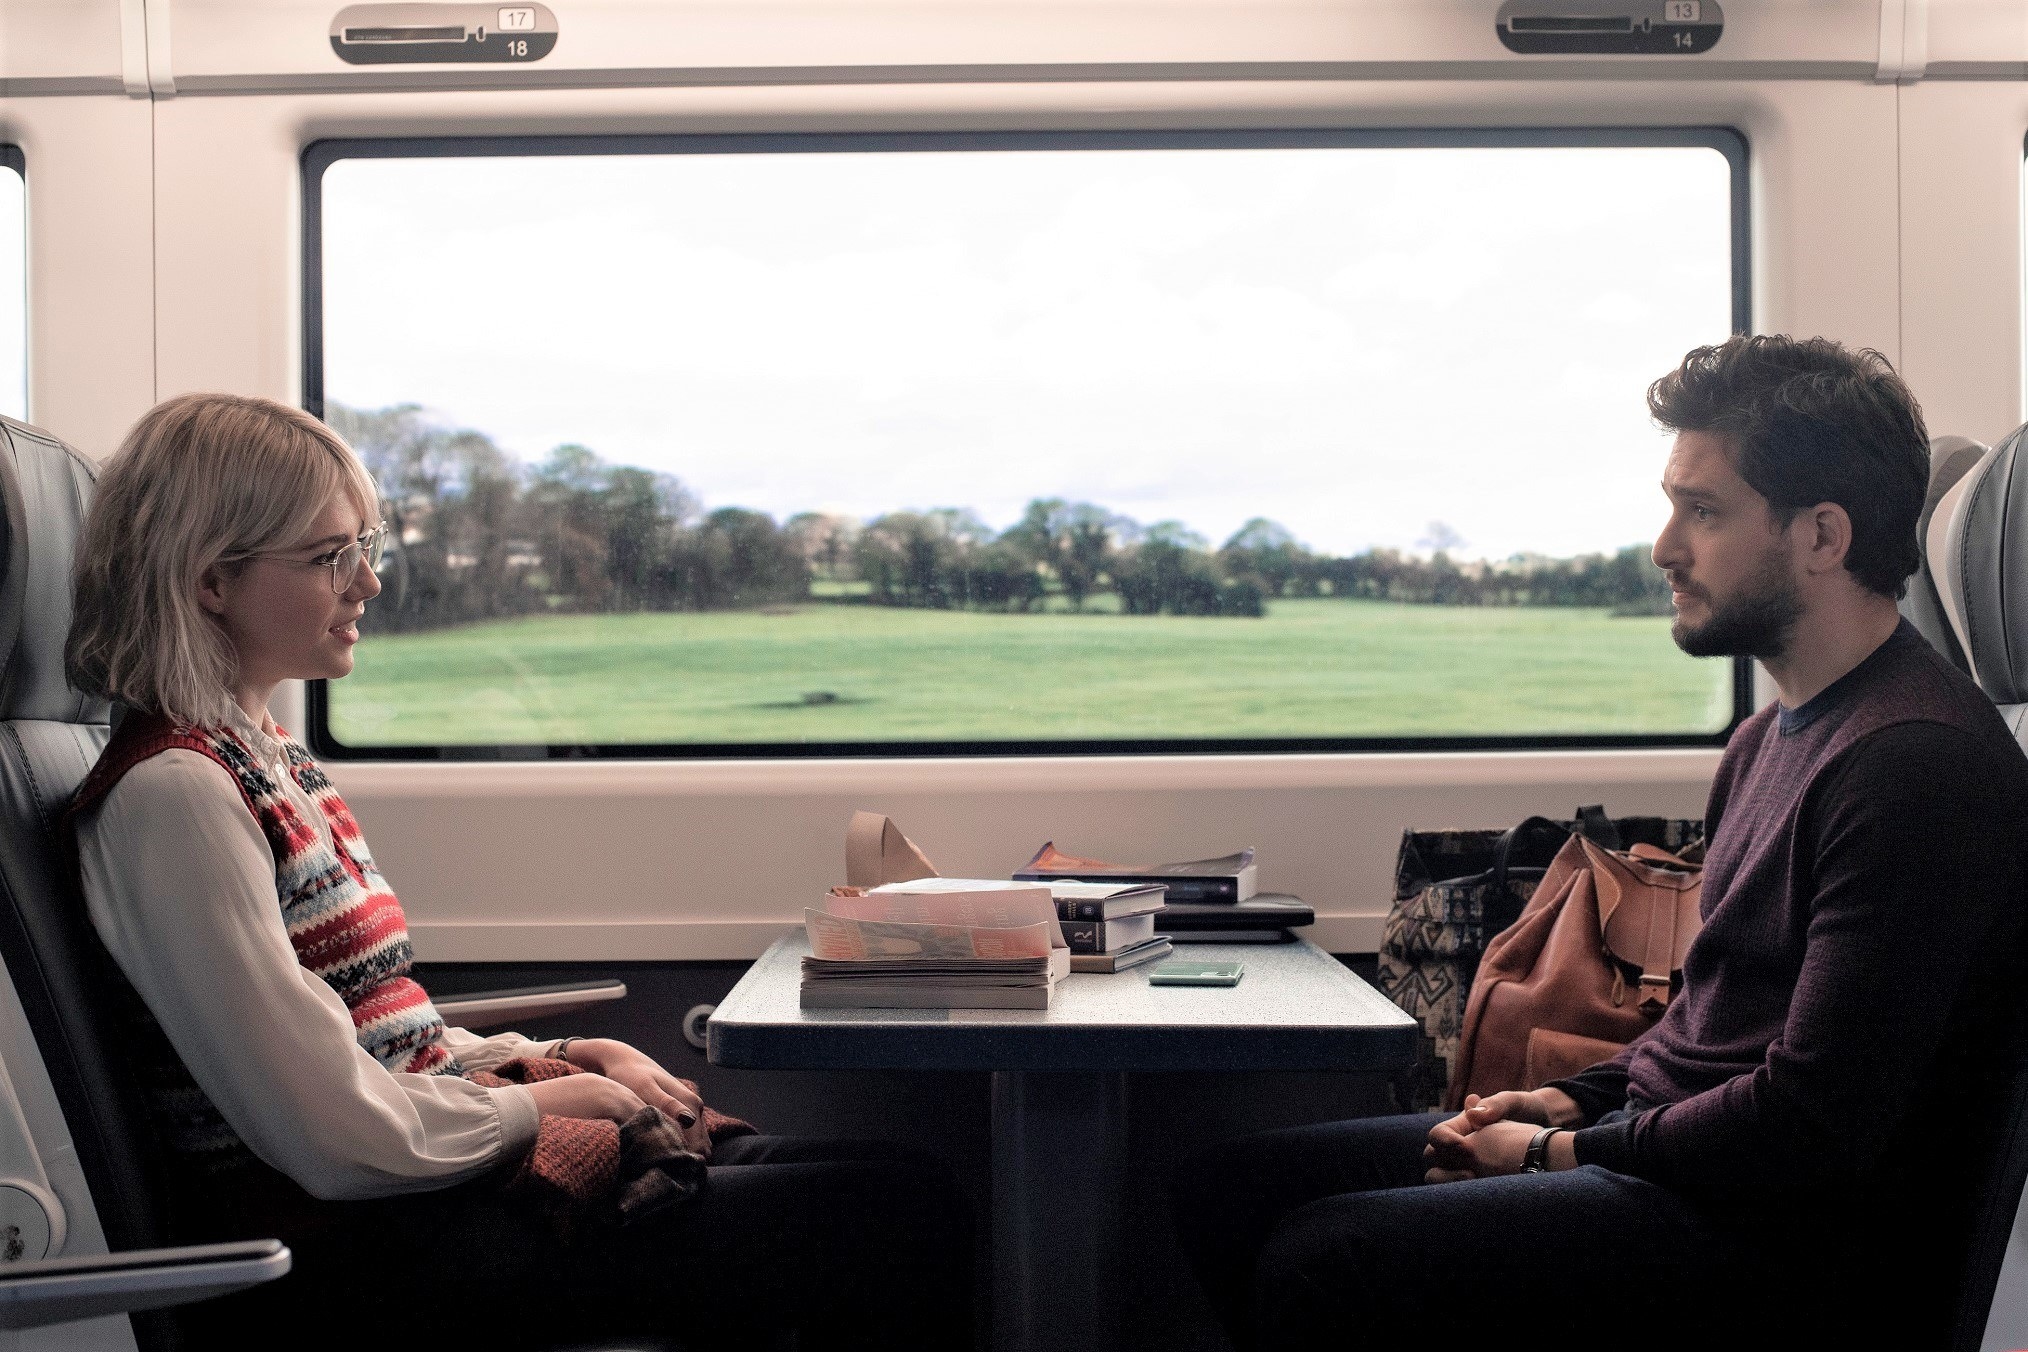 Lucy Boynton and Kit Harington in Episode 3: “Strangers on a Train”